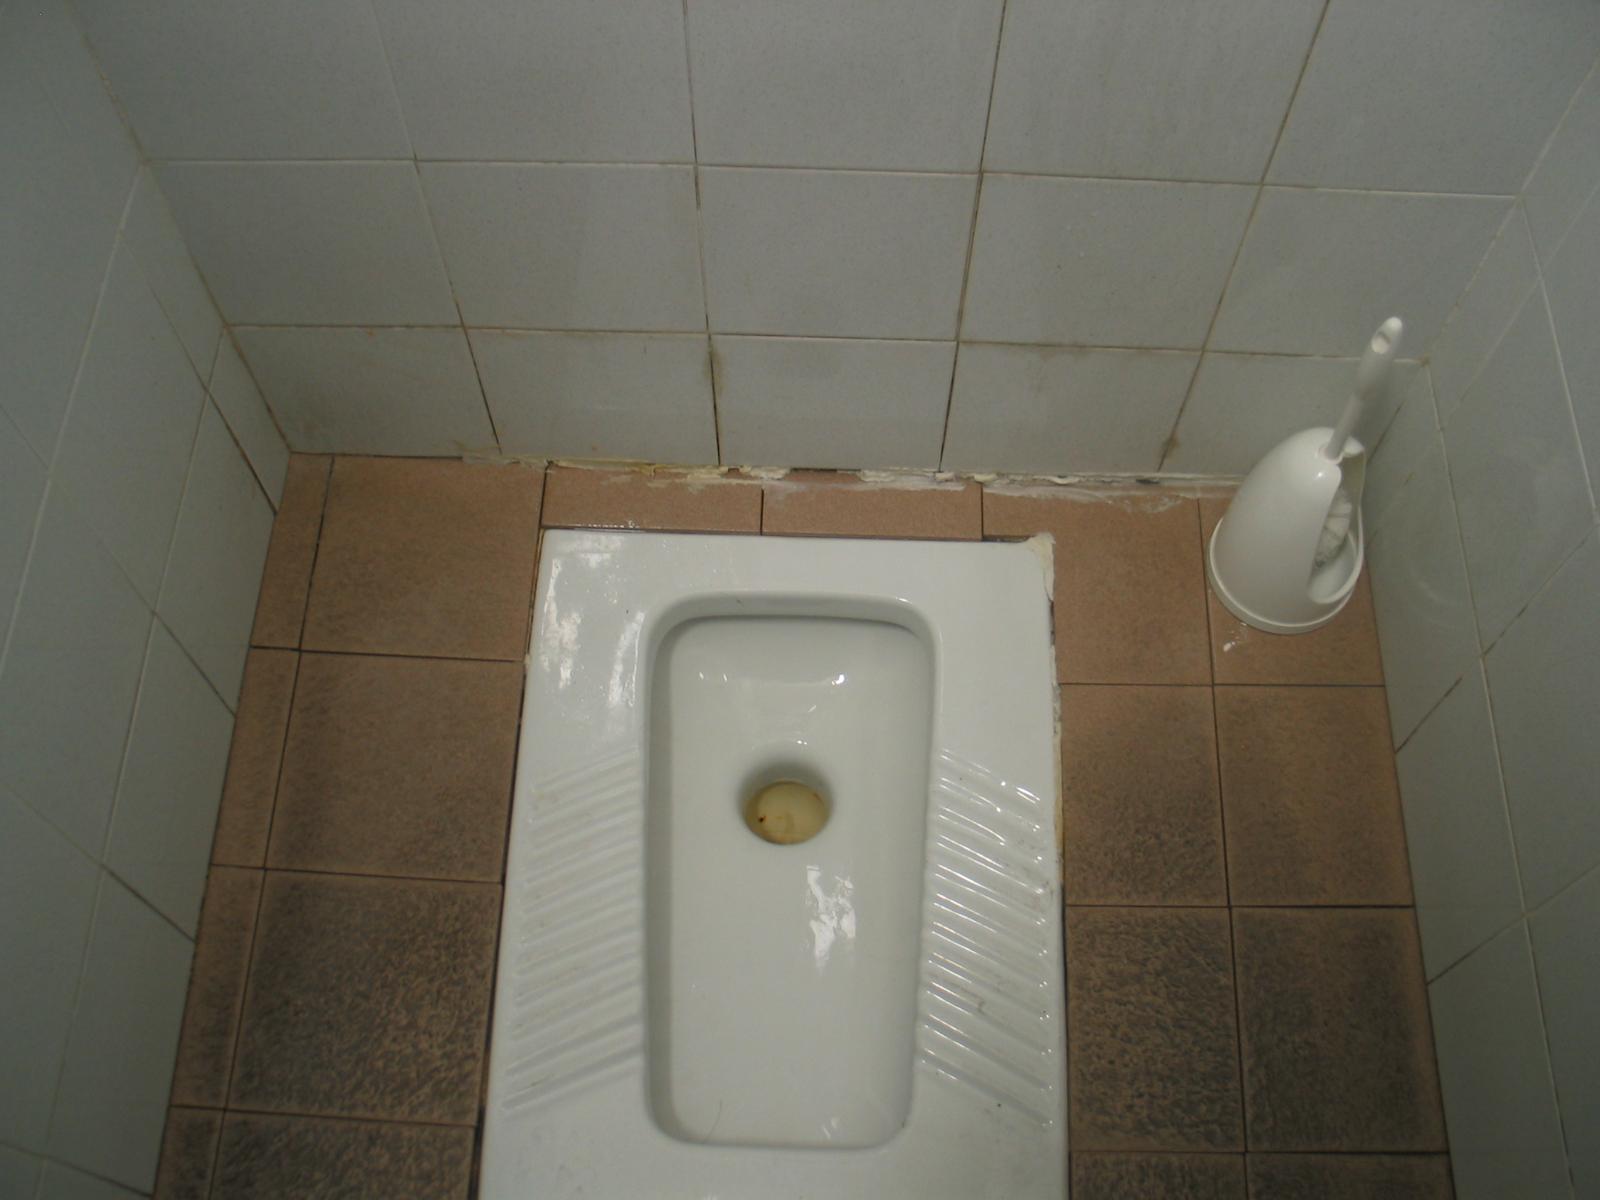 This is what they call a toilet